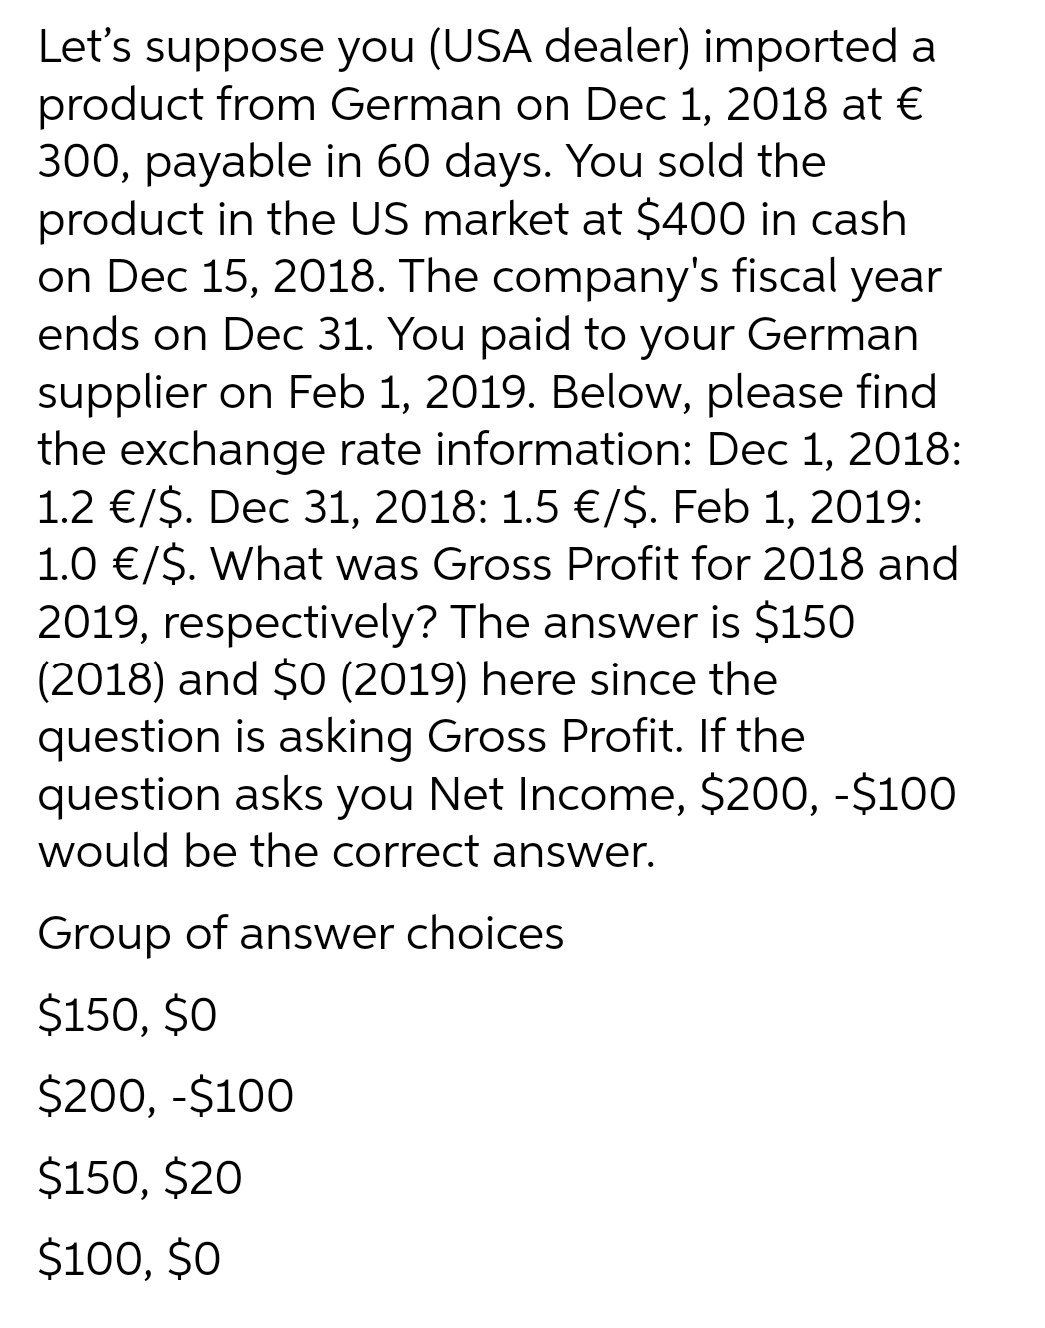 Let's suppose you (USA dealer) imported a
product from German on Dec 1, 2018 at €
300, payable in 60 days. You sold the
product in the US market at $400 in cash
on Dec 15, 2018. The company's fiscal year
ends on Dec 31. You paid to your German
supplier on Feb 1, 2019. Below, please find
the exchange rate information: Dec 1, 2018:
1.2 €/$. Dec 31, 2018: 1.5 €/$. Feb 1, 2019:
1.0 €/$. What was Gross Profit for 2018 and
2019, respectively? The answer is $150
(2018) and $O (2019) here since the
question is asking Gross Profit. If the
question asks you Net Income, $200, -$10O
would be the correct answer.
Group of answer choices
$150, $0
$200, -$100
$150, $20
$100, $O
